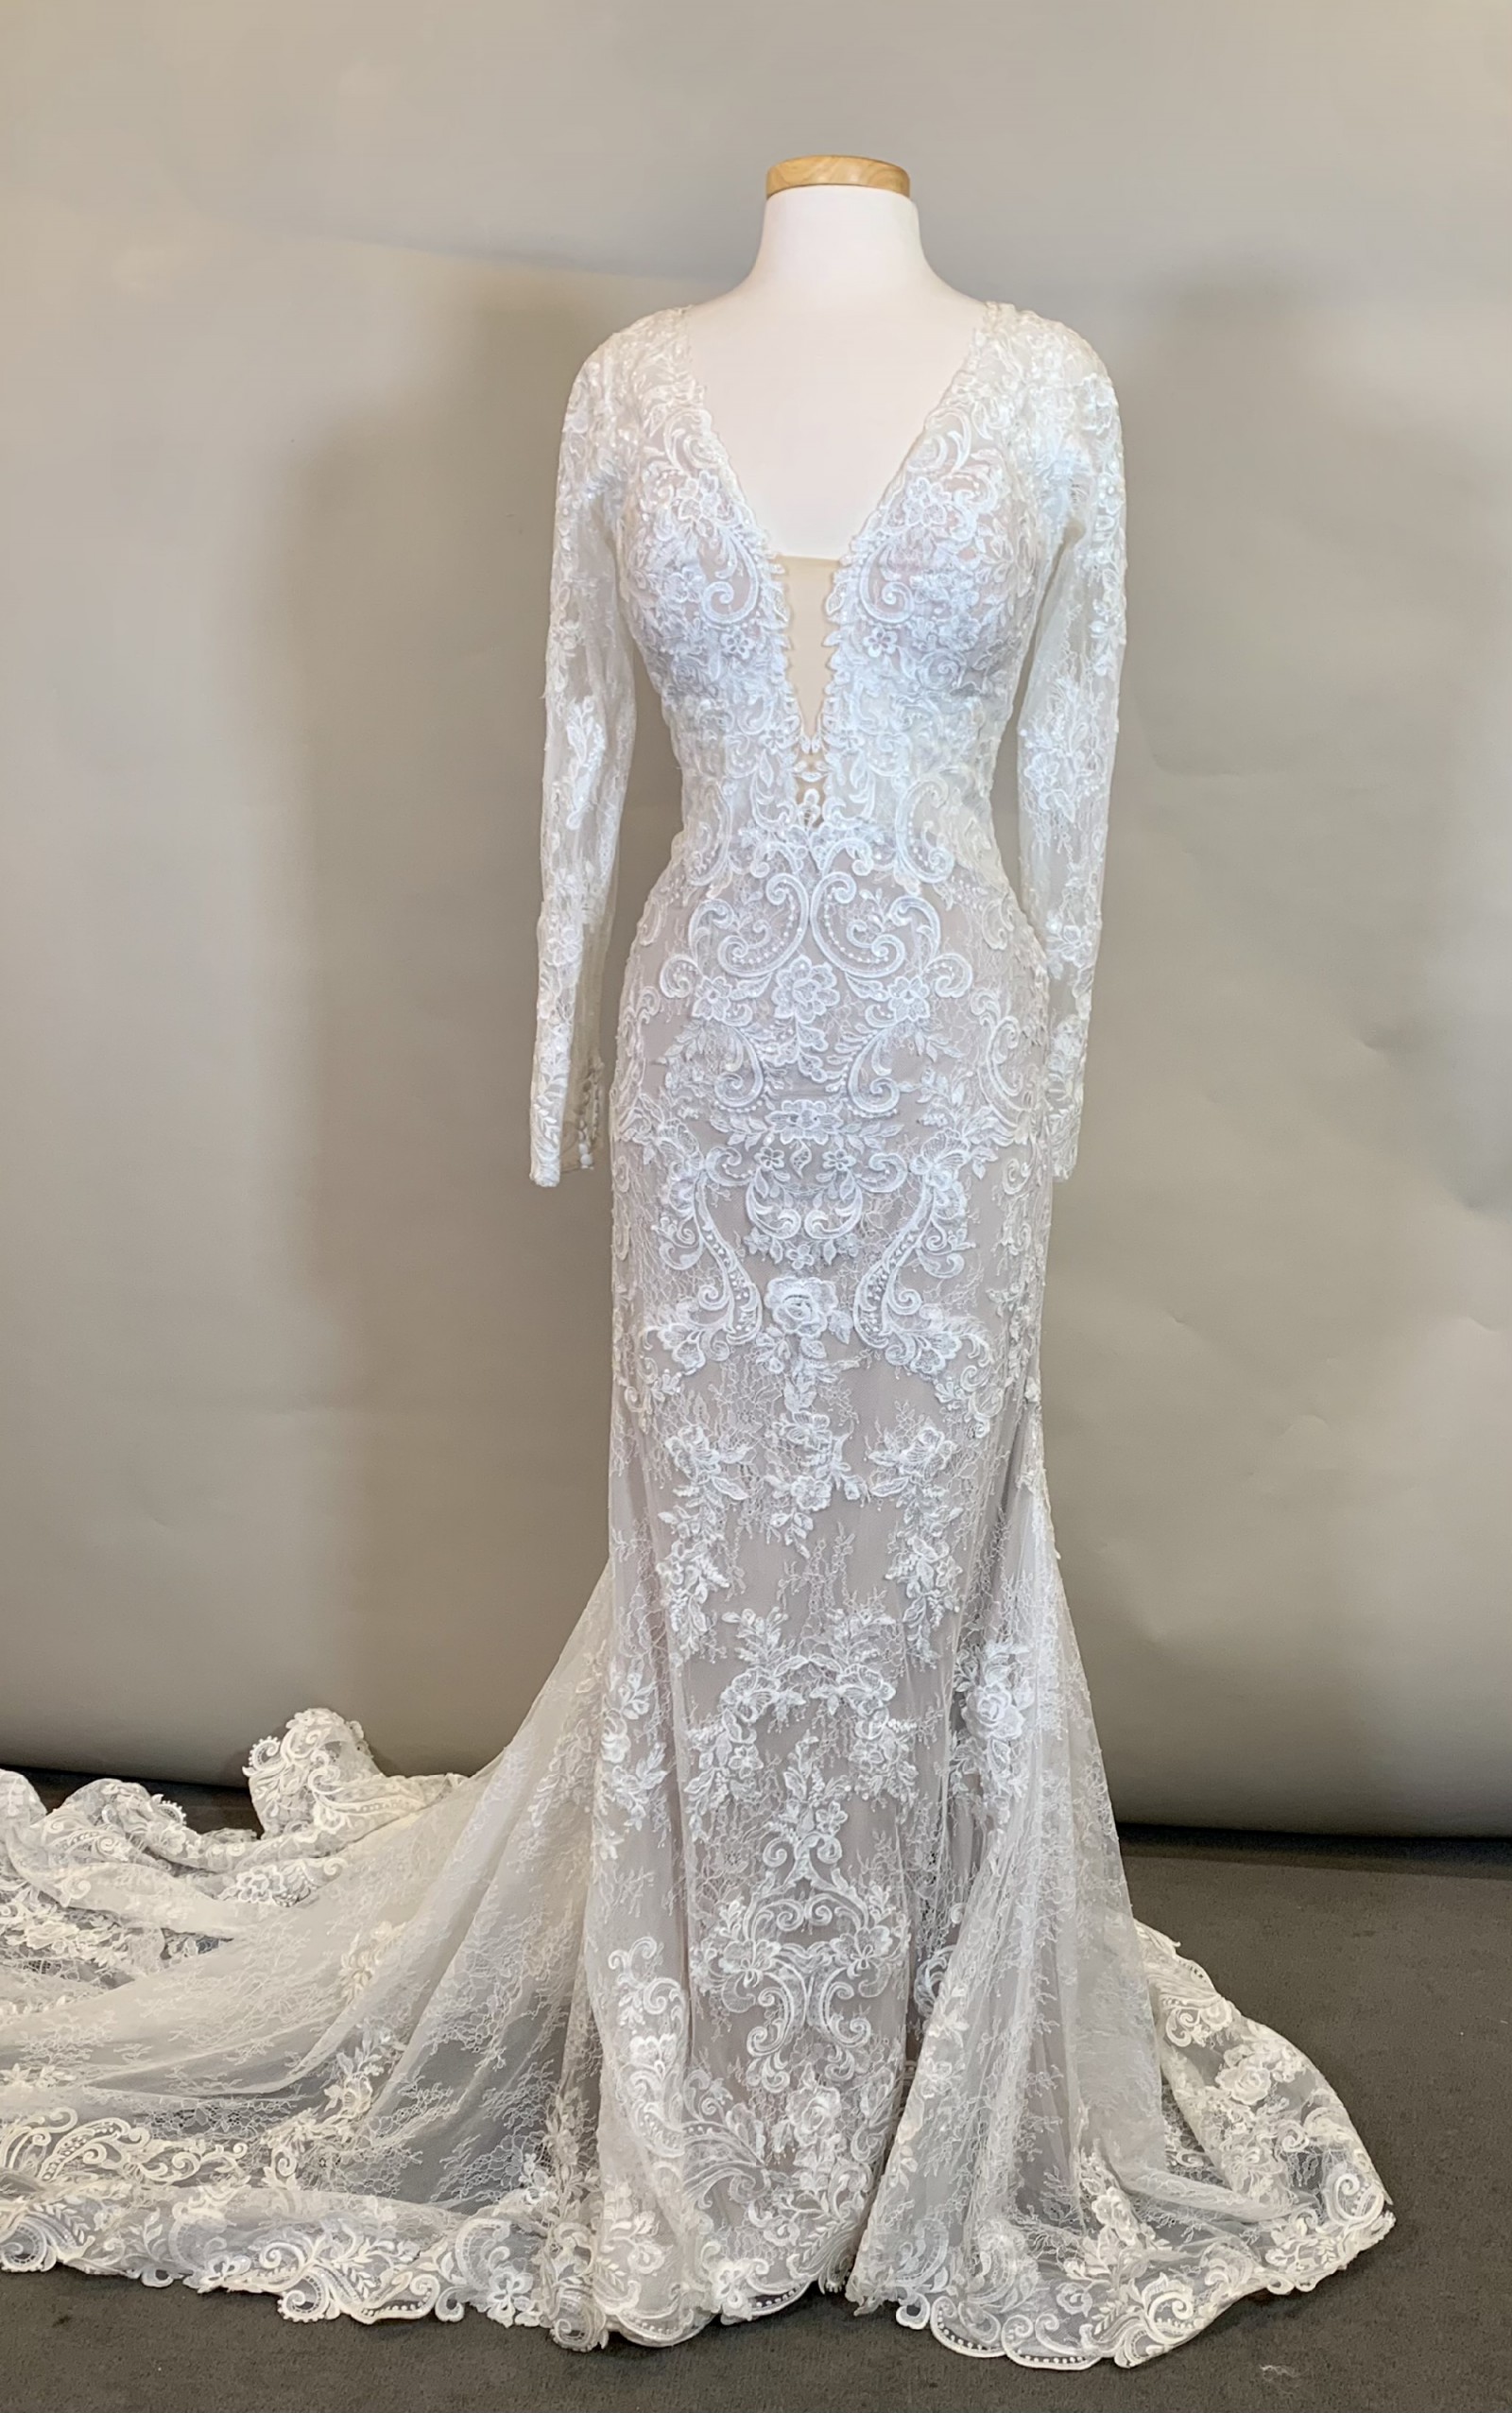 Sheer Floral Lace Wedding Dress with Long Sleeves - Essense of